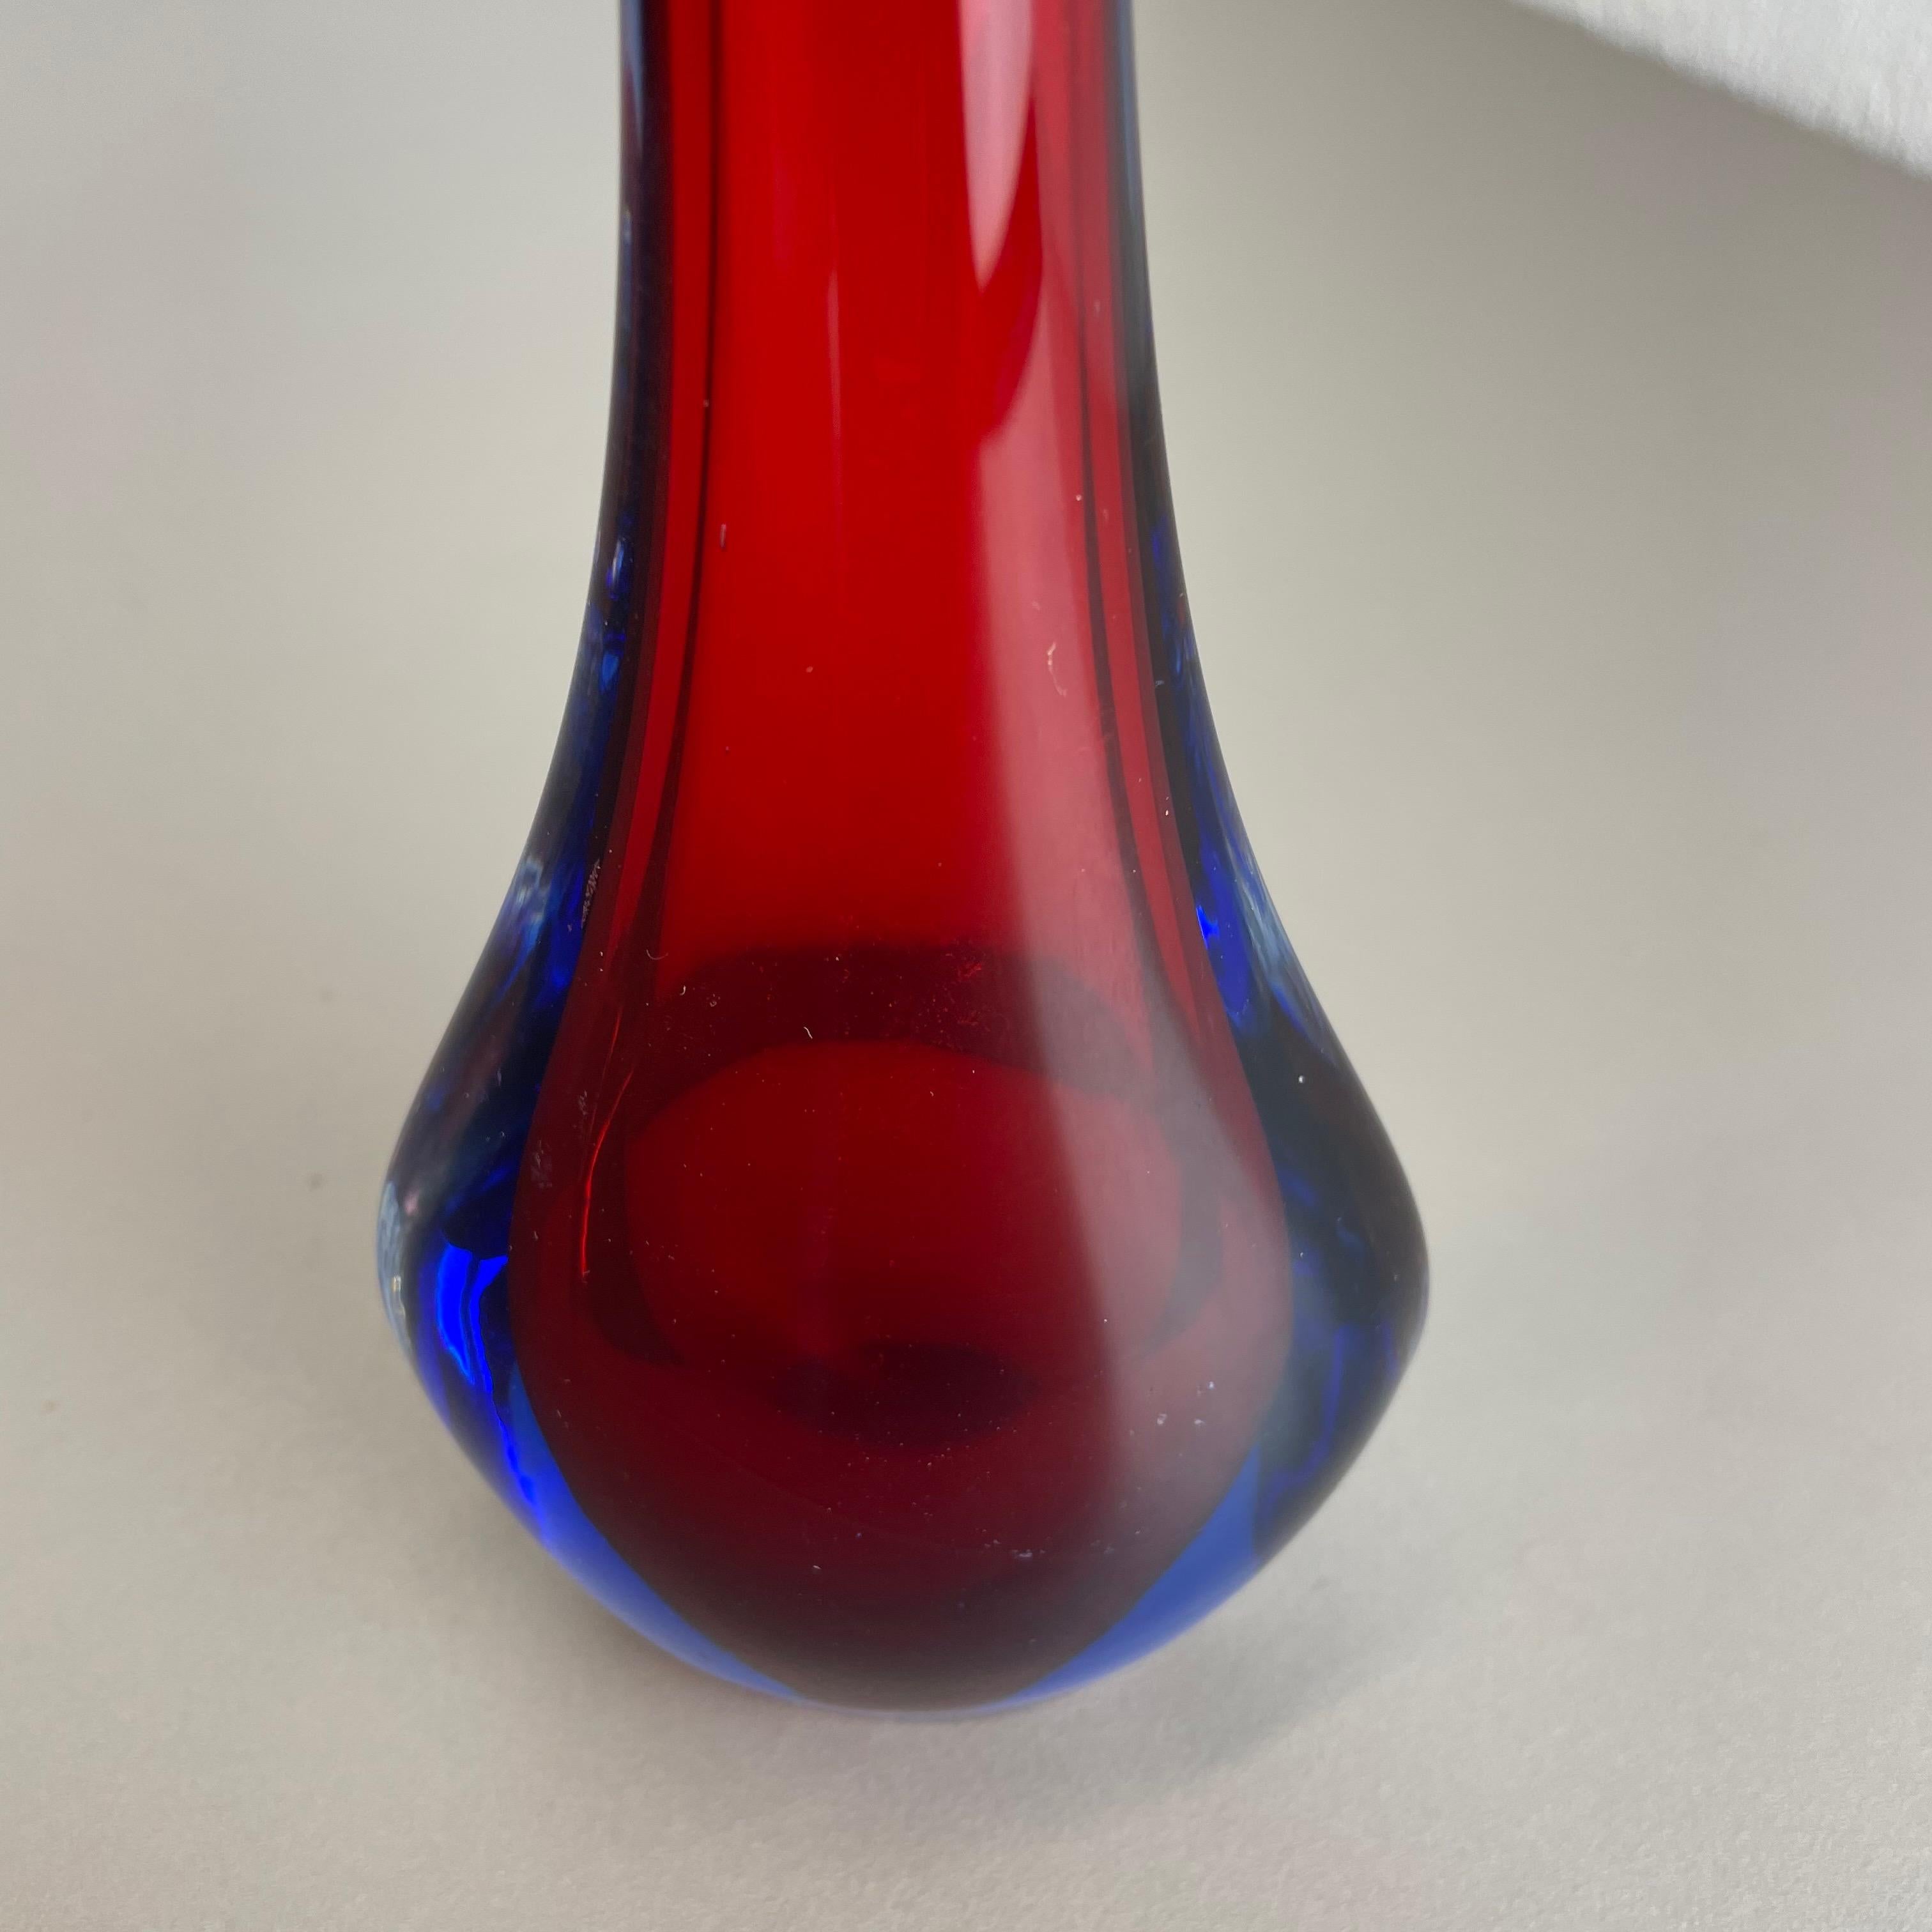 Large 1960s Murano Glass Sommerso 29cm Single-Stem Vase by Flavio Poli, Italy For Sale 7